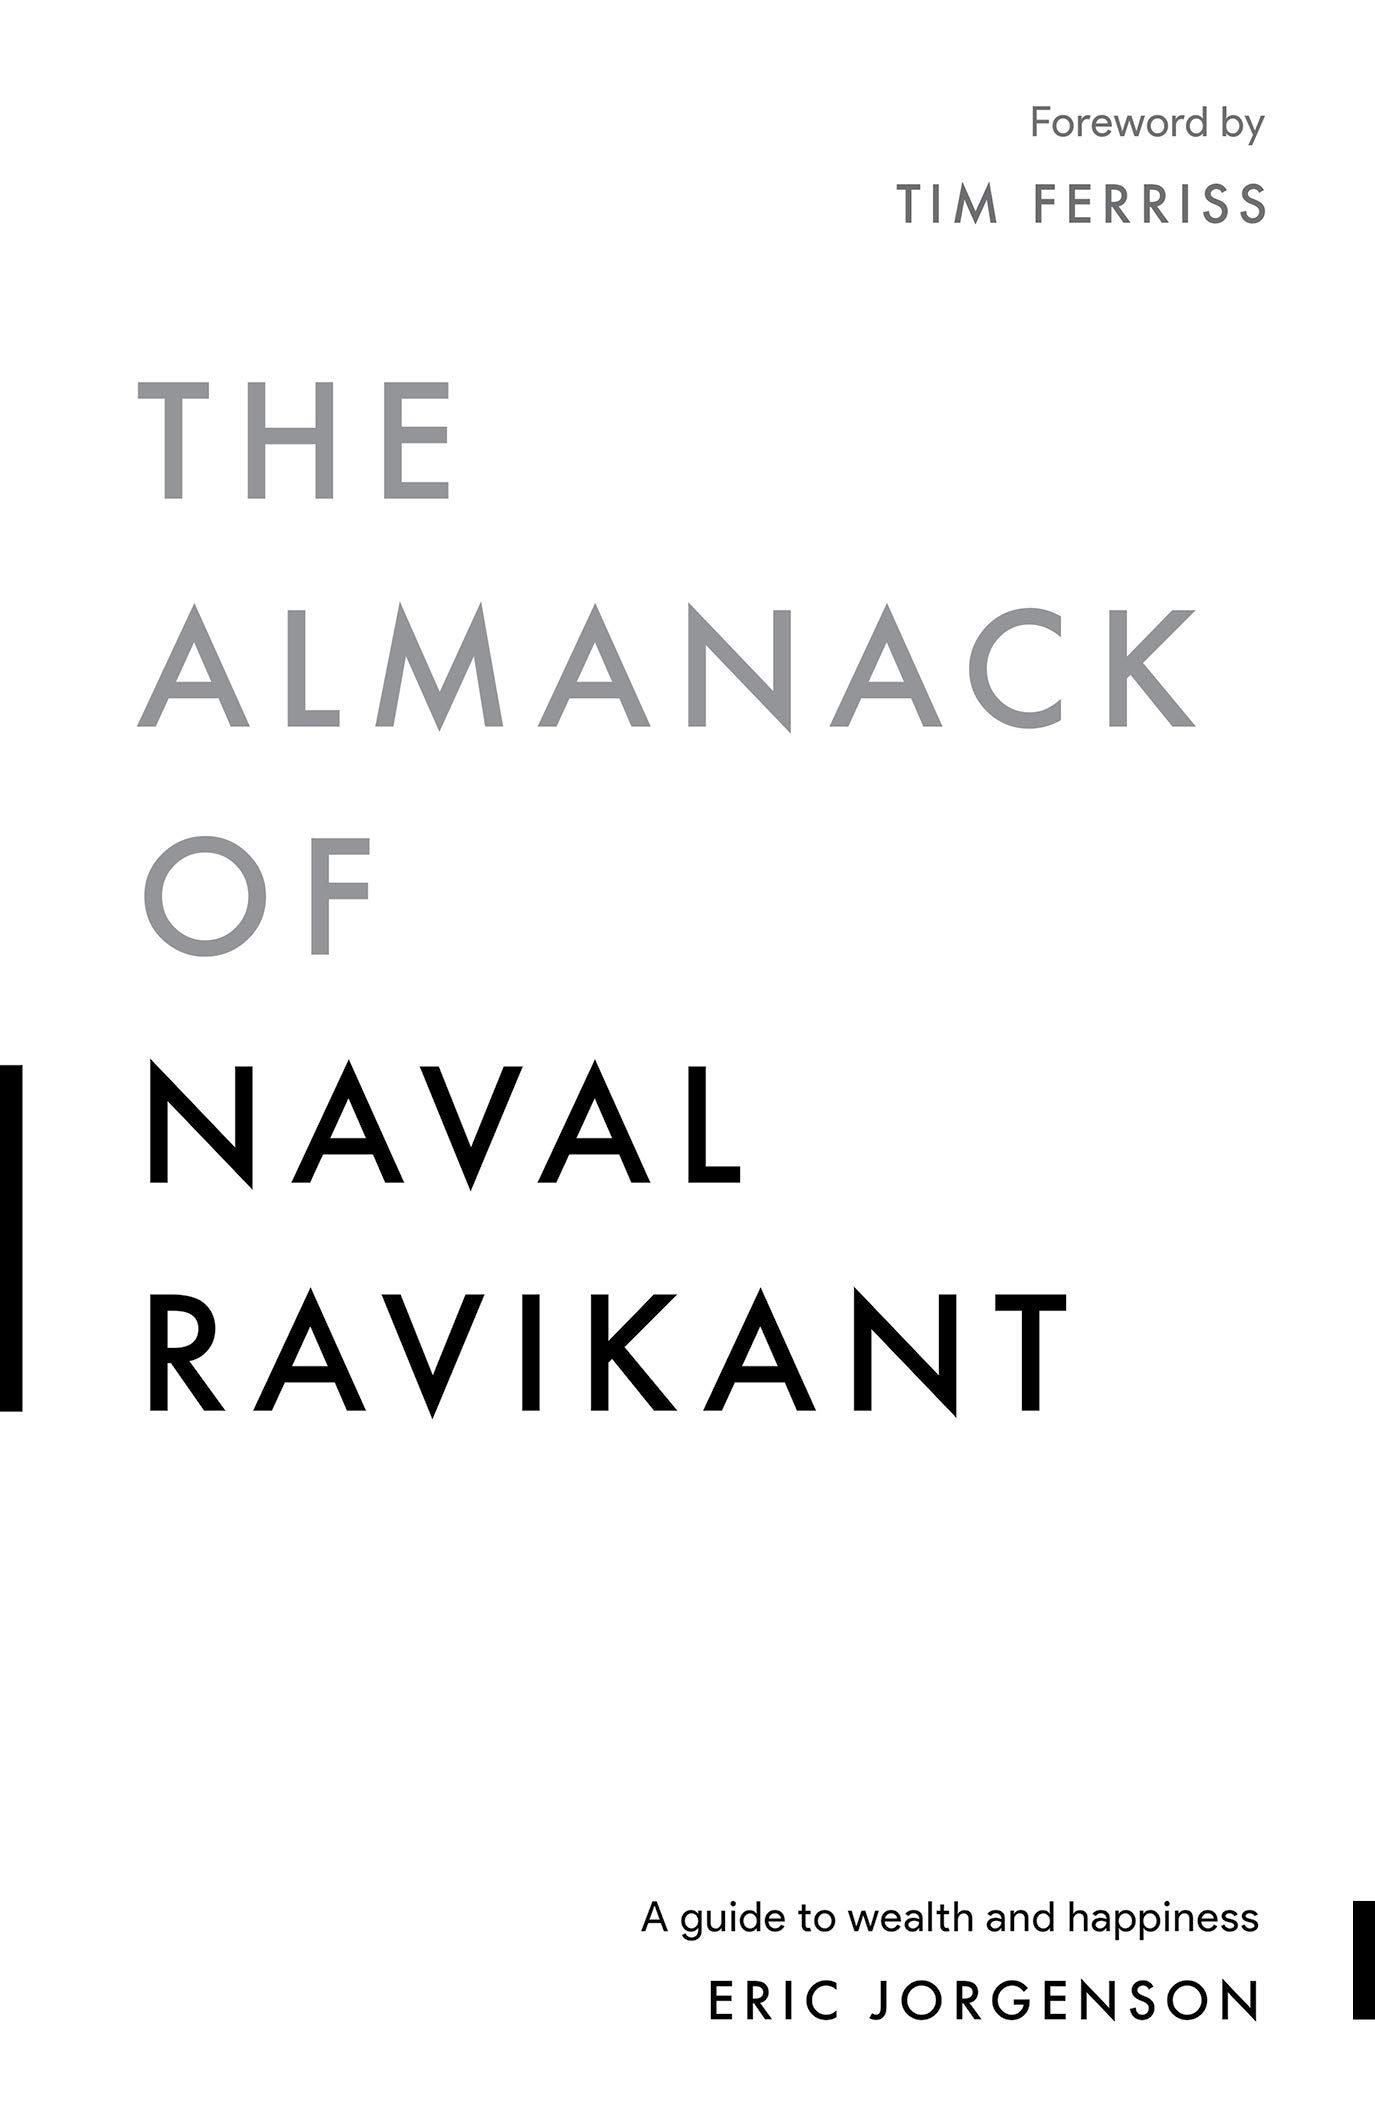 Almanack of Naval Ravikant book cover on the LBS website